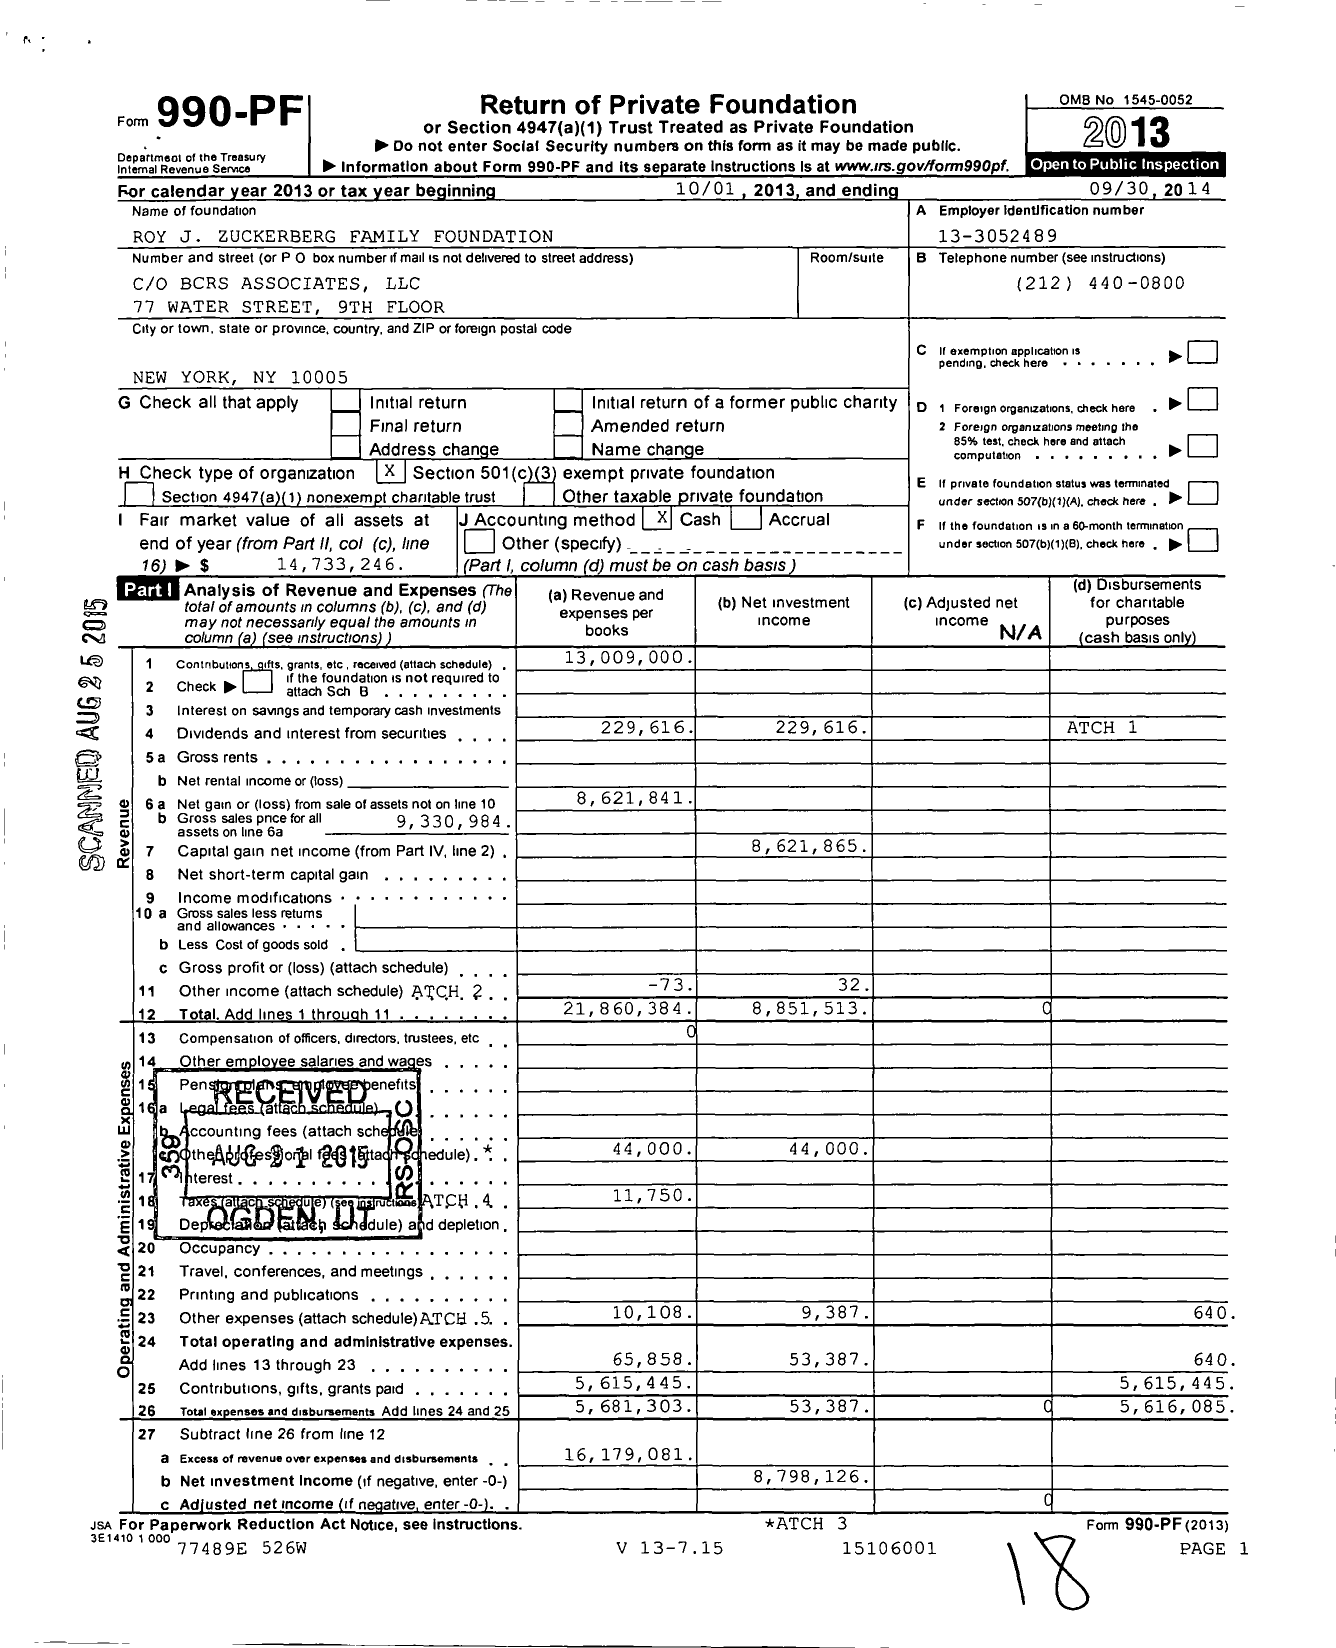 Image of first page of 2013 Form 990PF for Roy J Zuckerberg Family Foundation